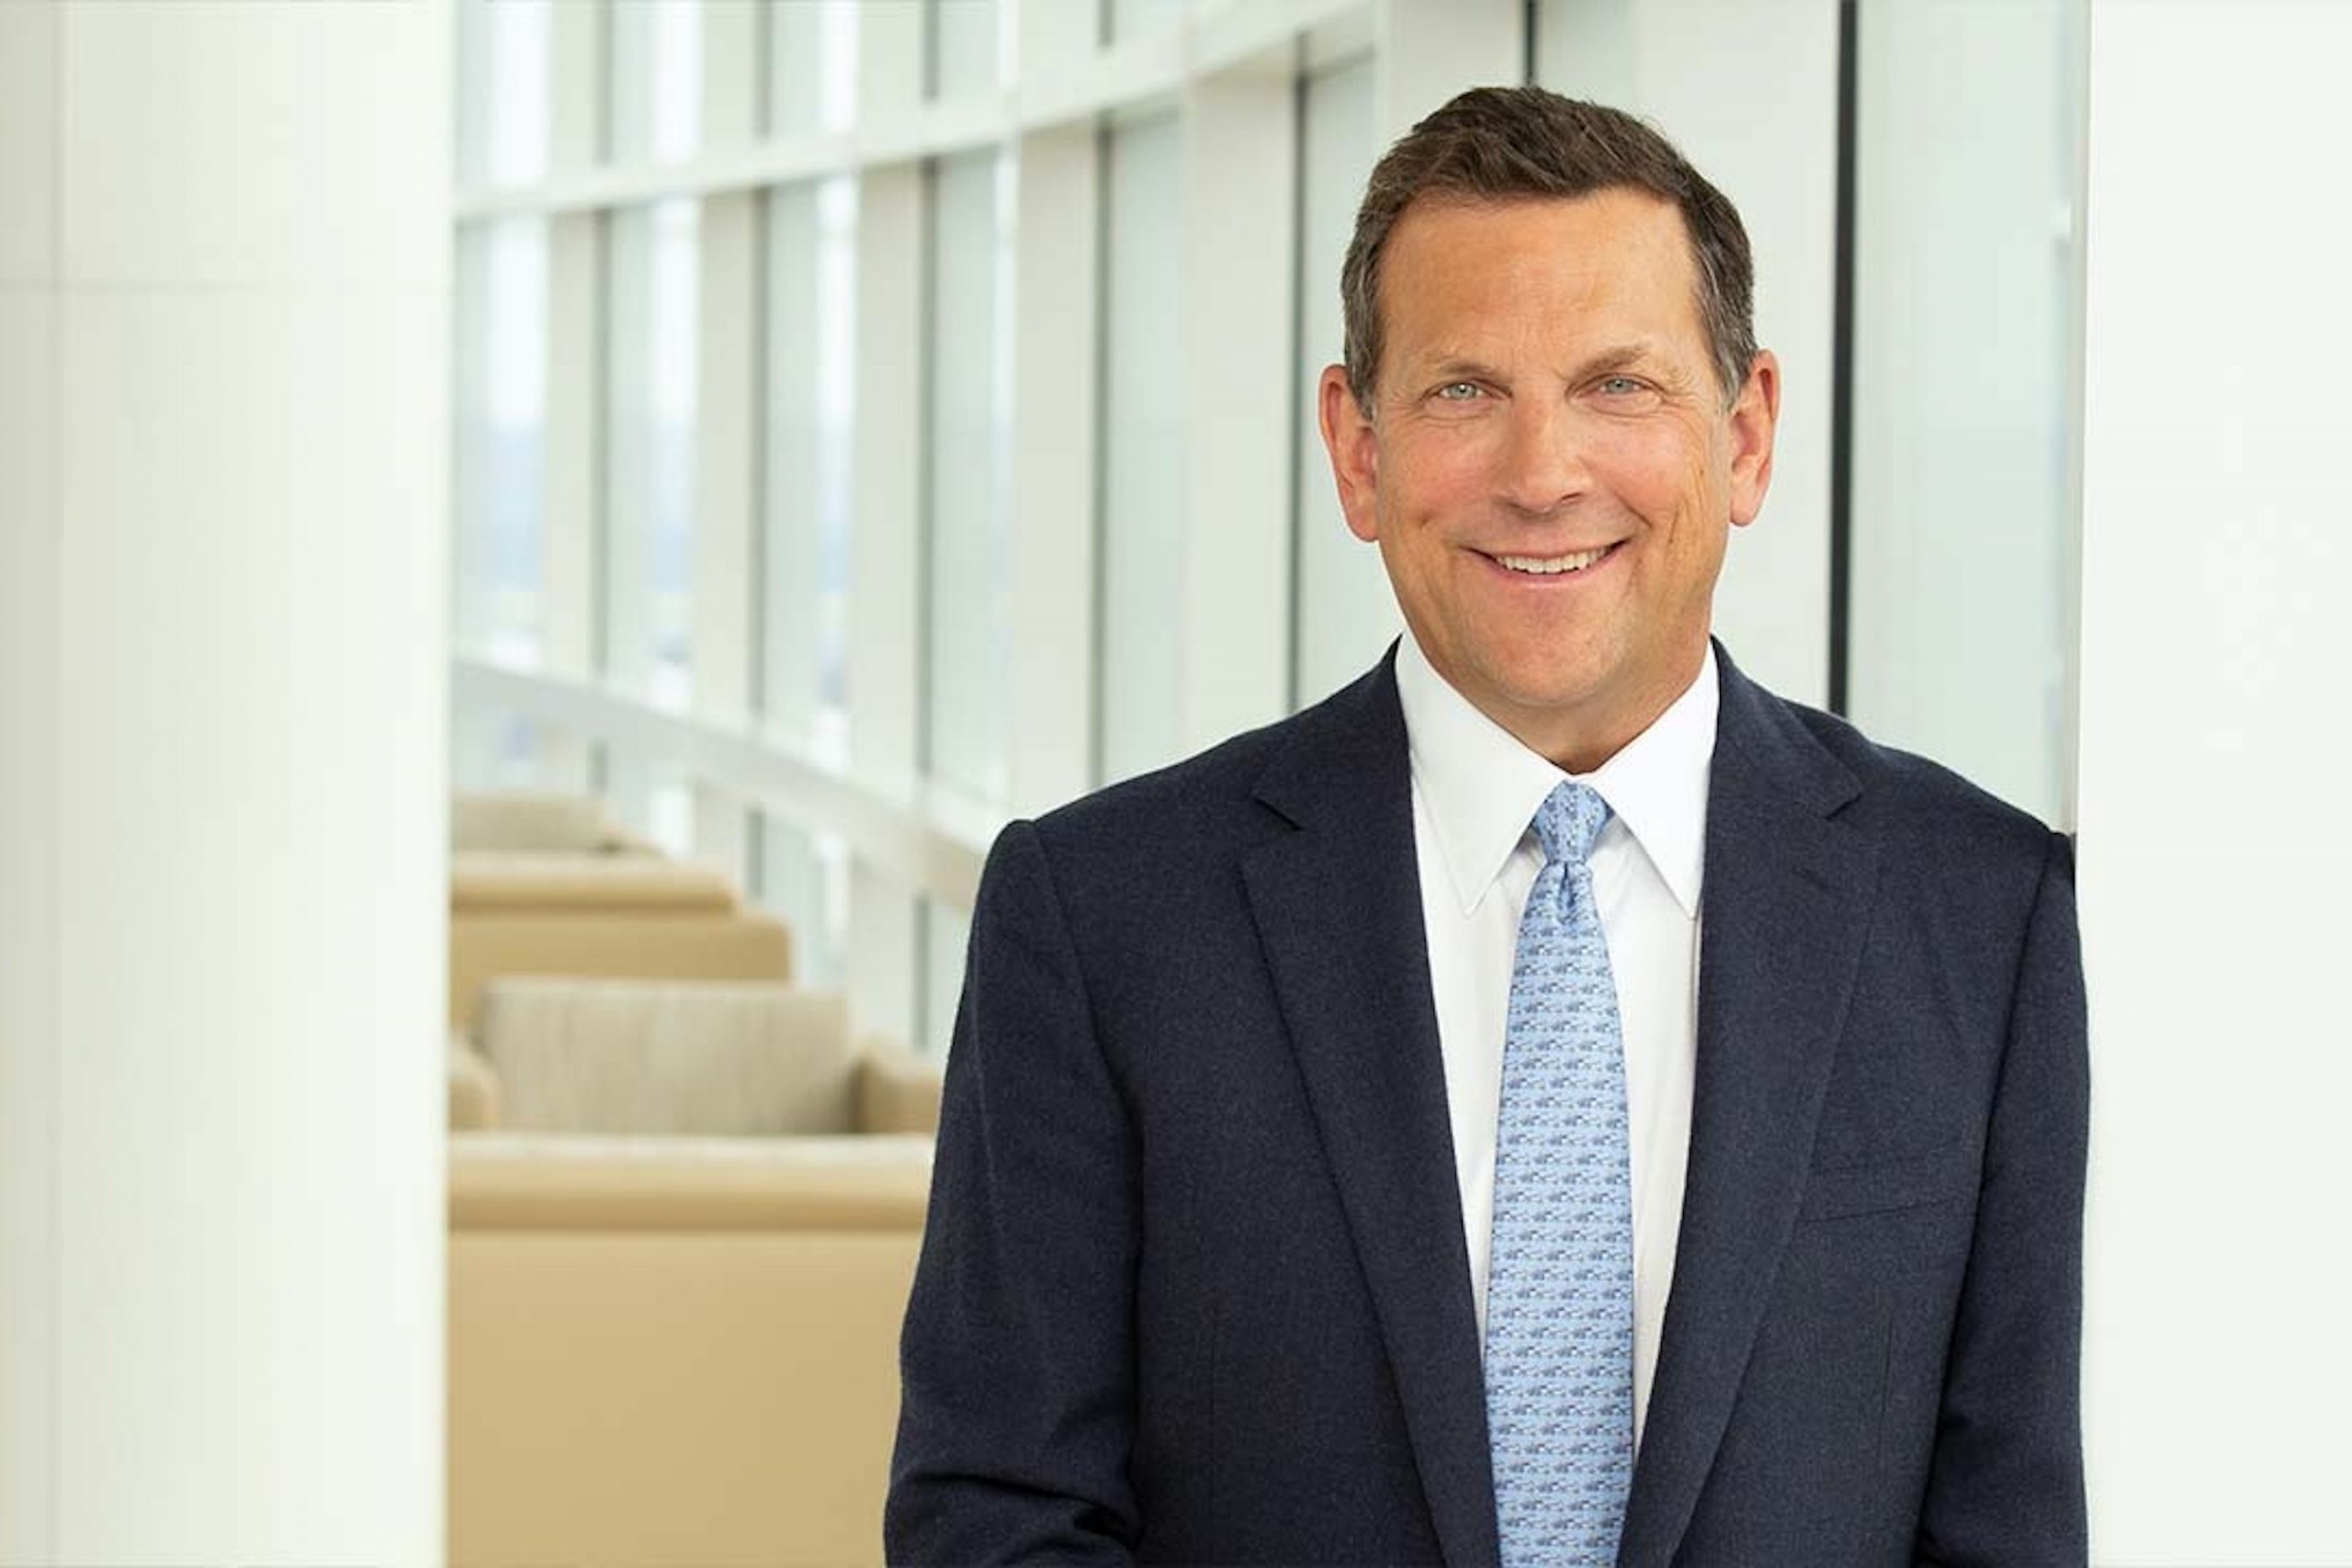 Northwestern Mutual CEO: ‘Look at volatility as an opportunity, not a risk’